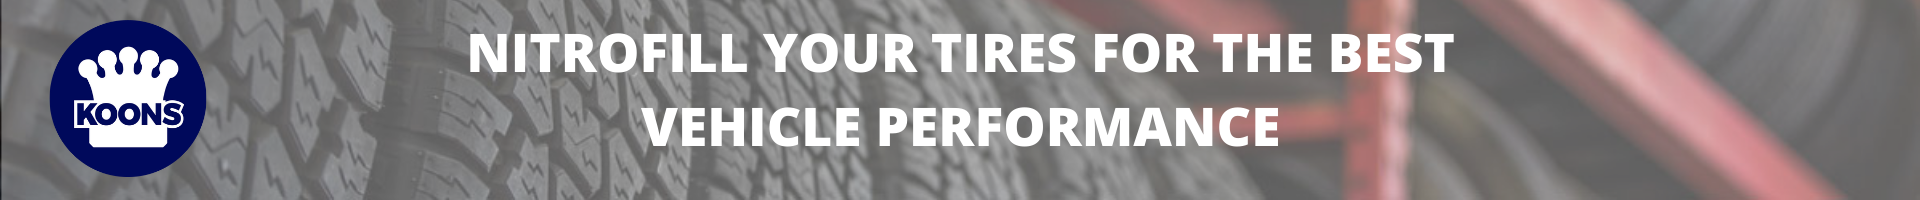 Nitro Fill Your Tires At Koons Woodbridge Ford